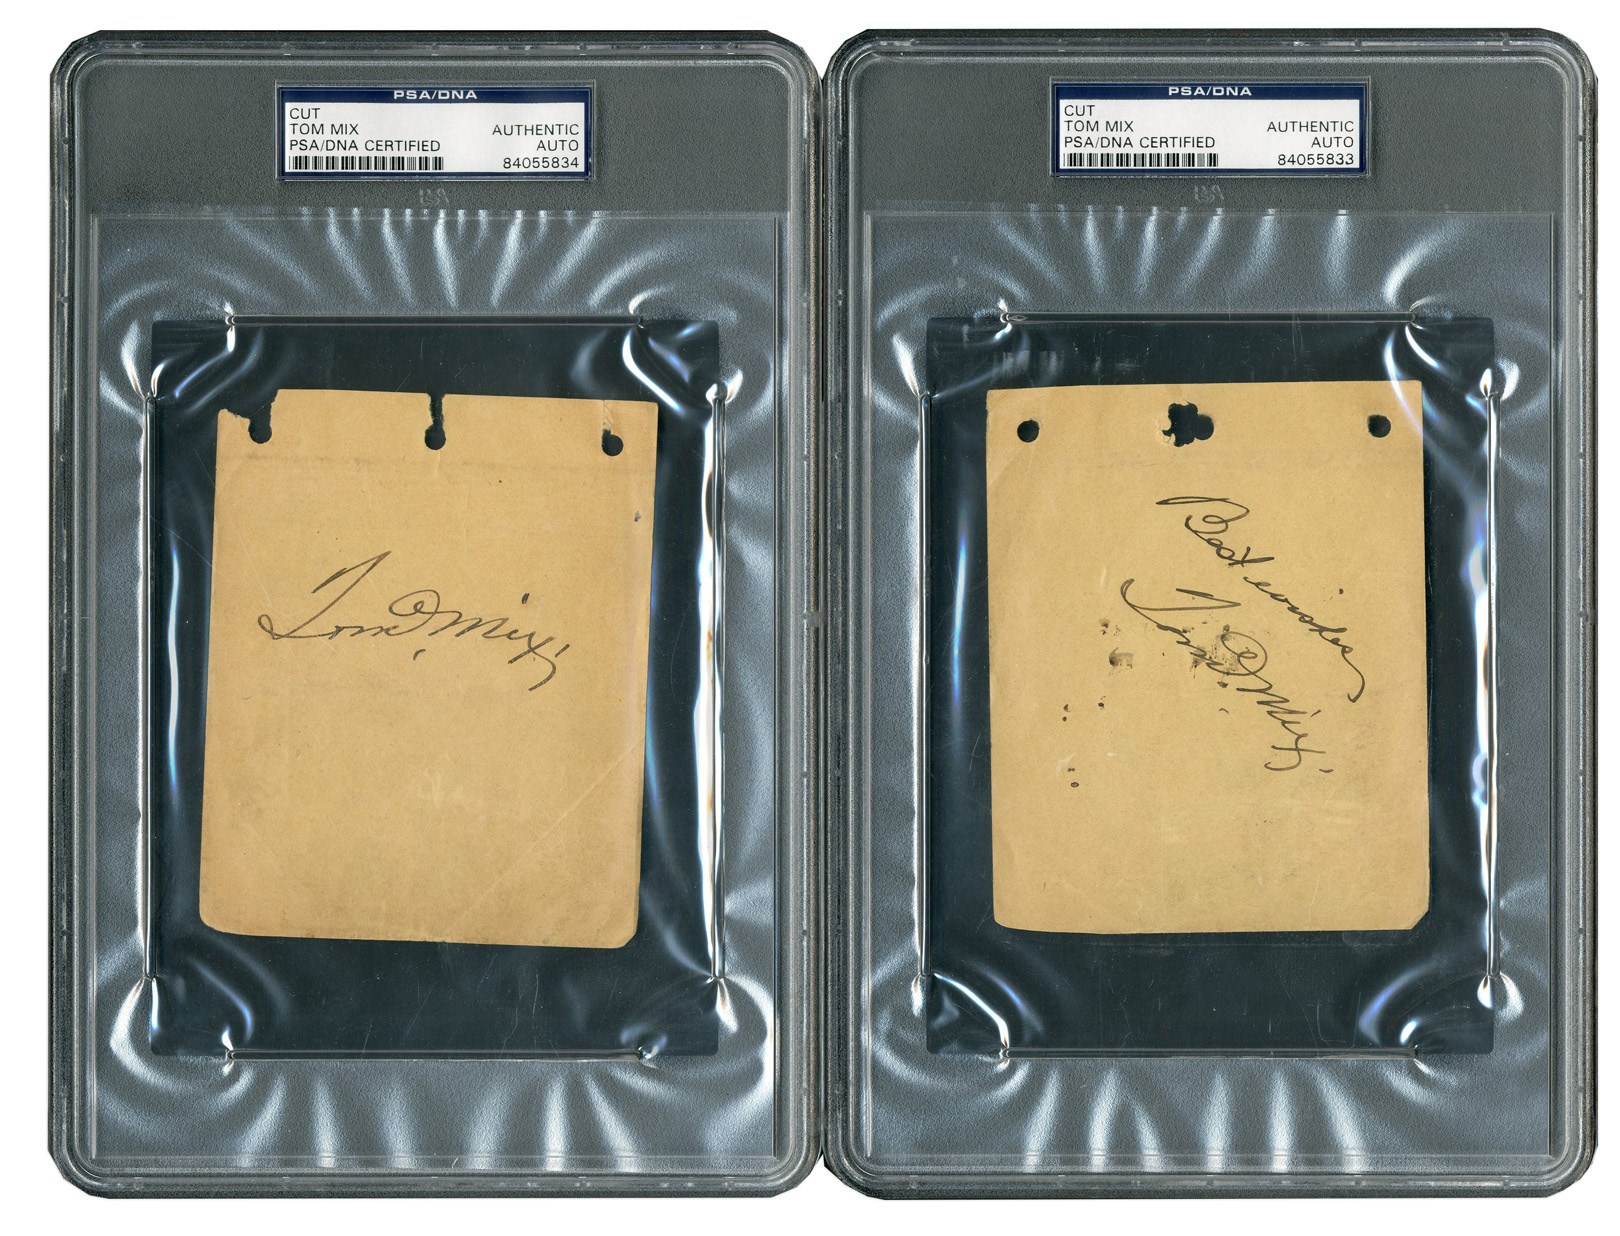 Rock And Pop Culture - Three Tom Mix Autographs (with PSA 9)